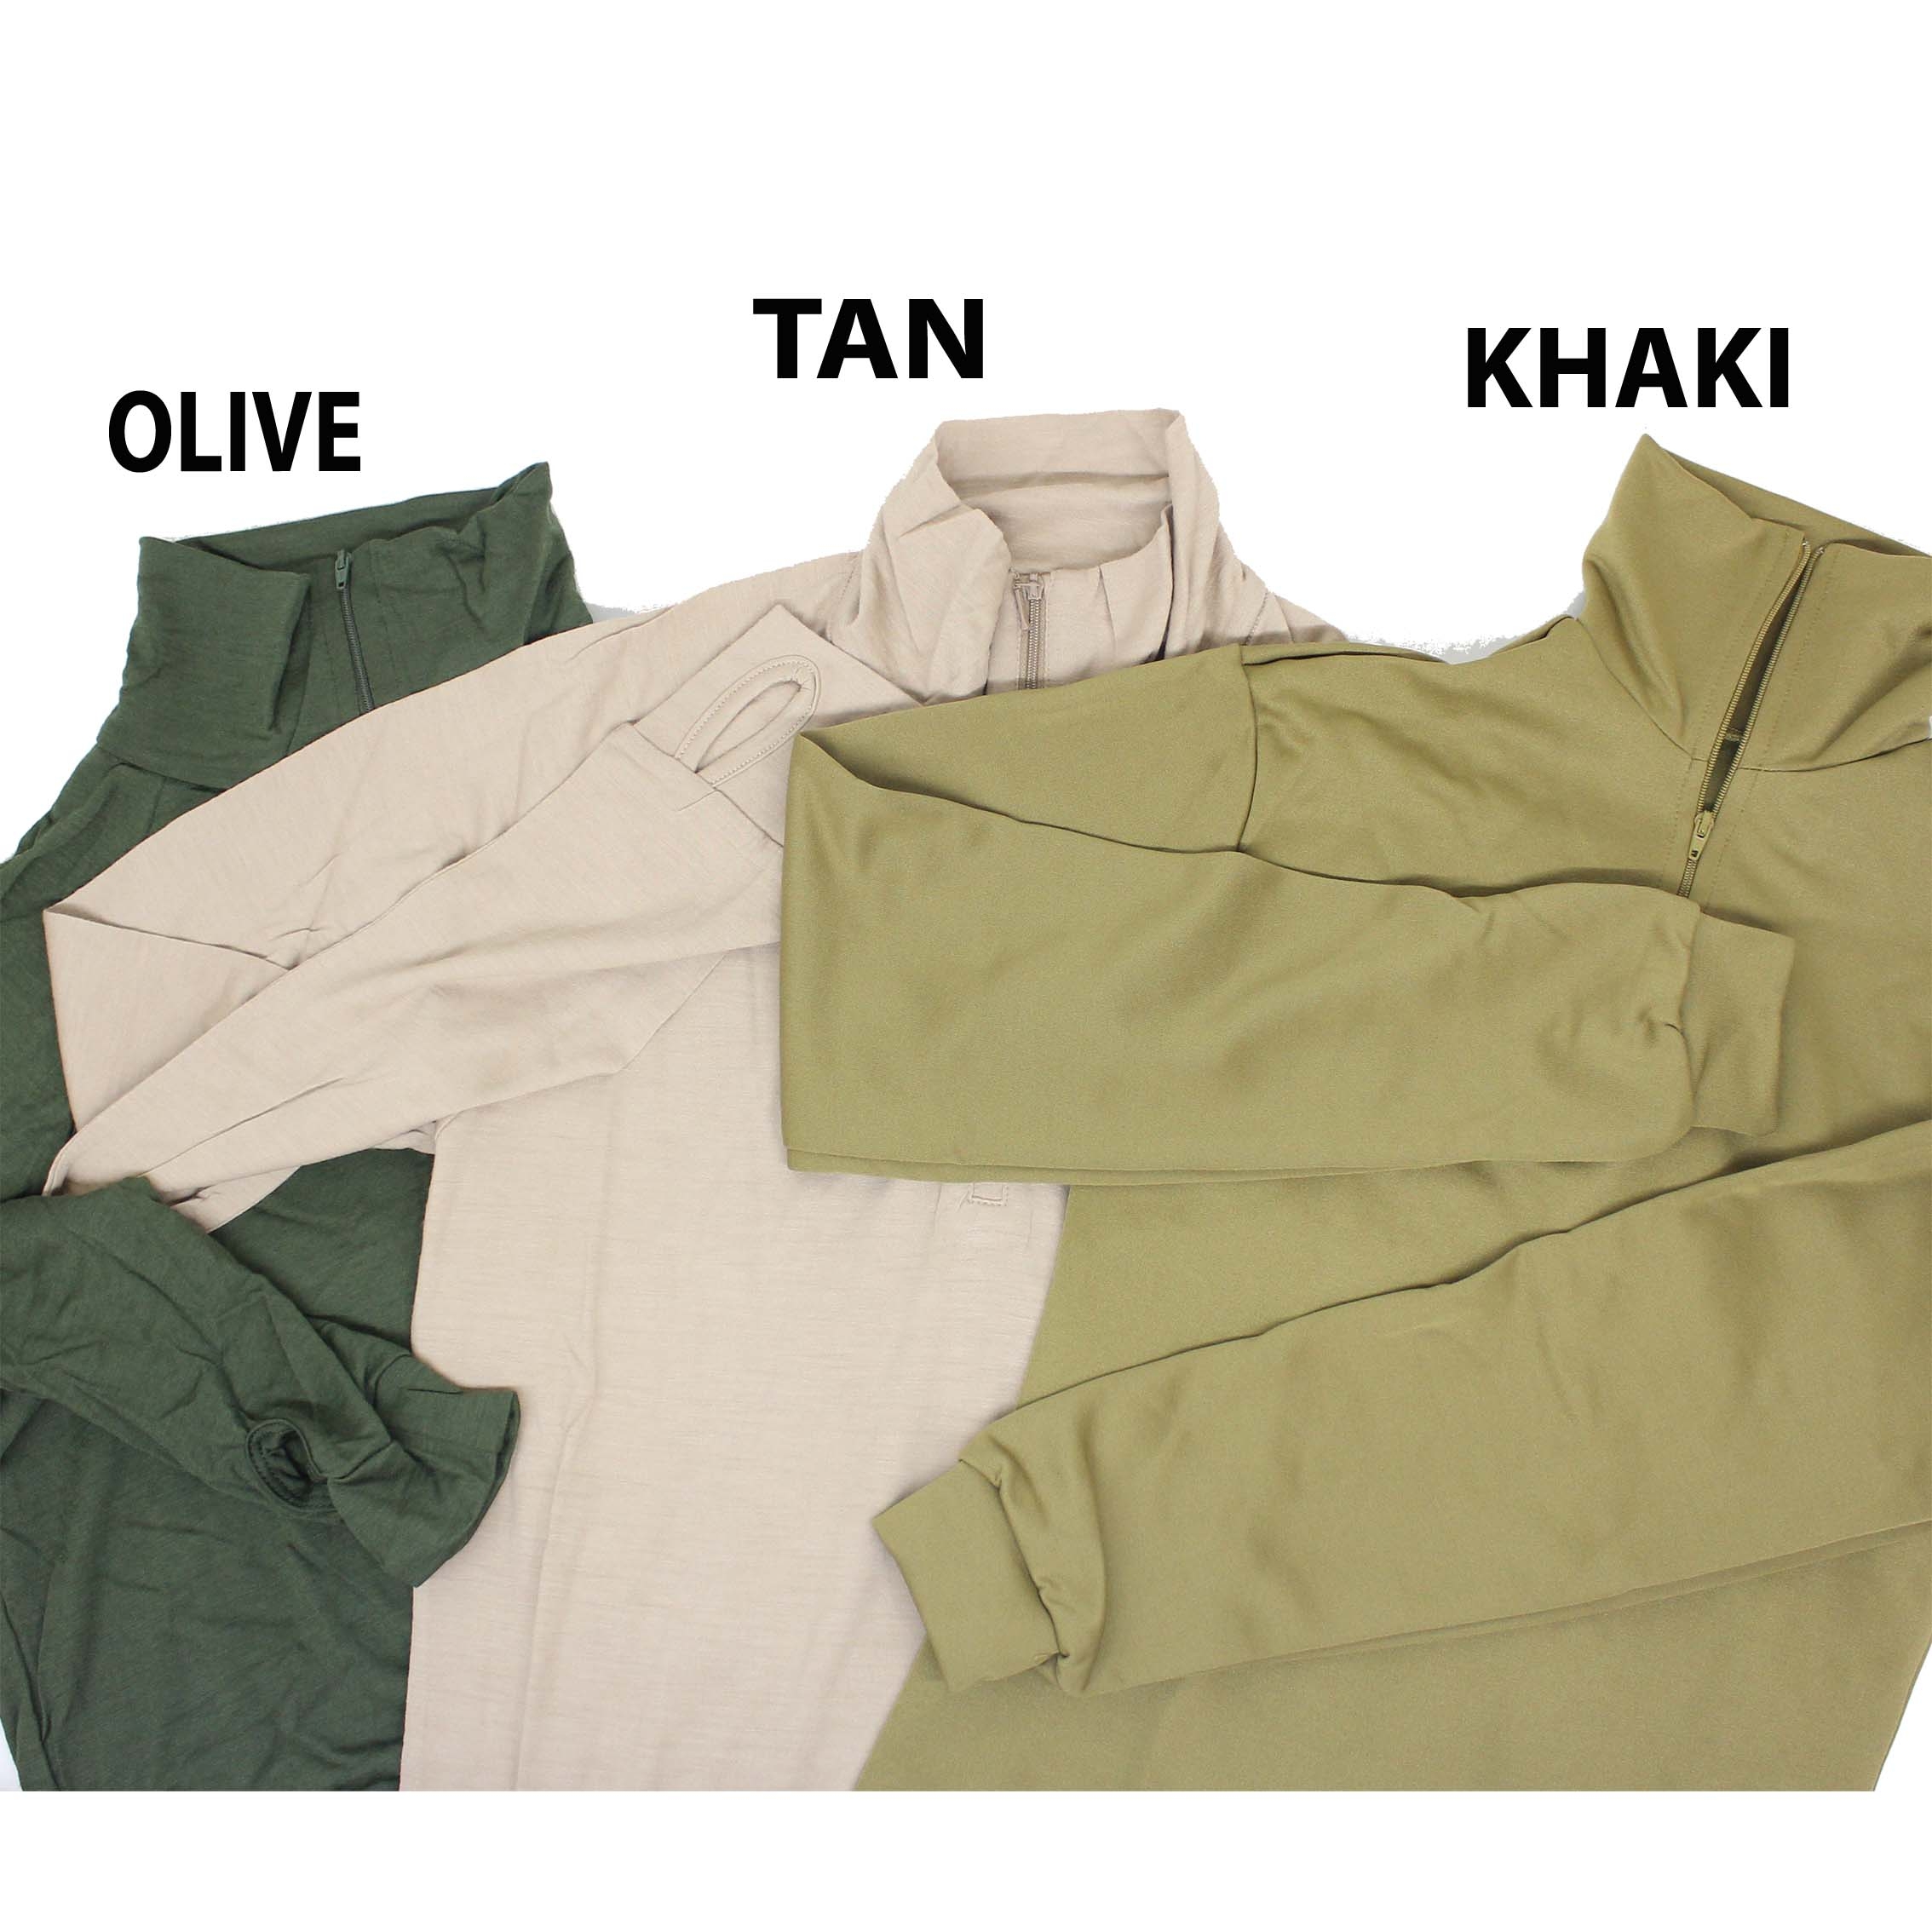 MILITARY SURPLUS Australian Army Undershirt - Stay Warm in the Wilderness  with our Wide Range of Thermal Underwear - MILITARY SURPLUS USED CORE  WAREHOUSE